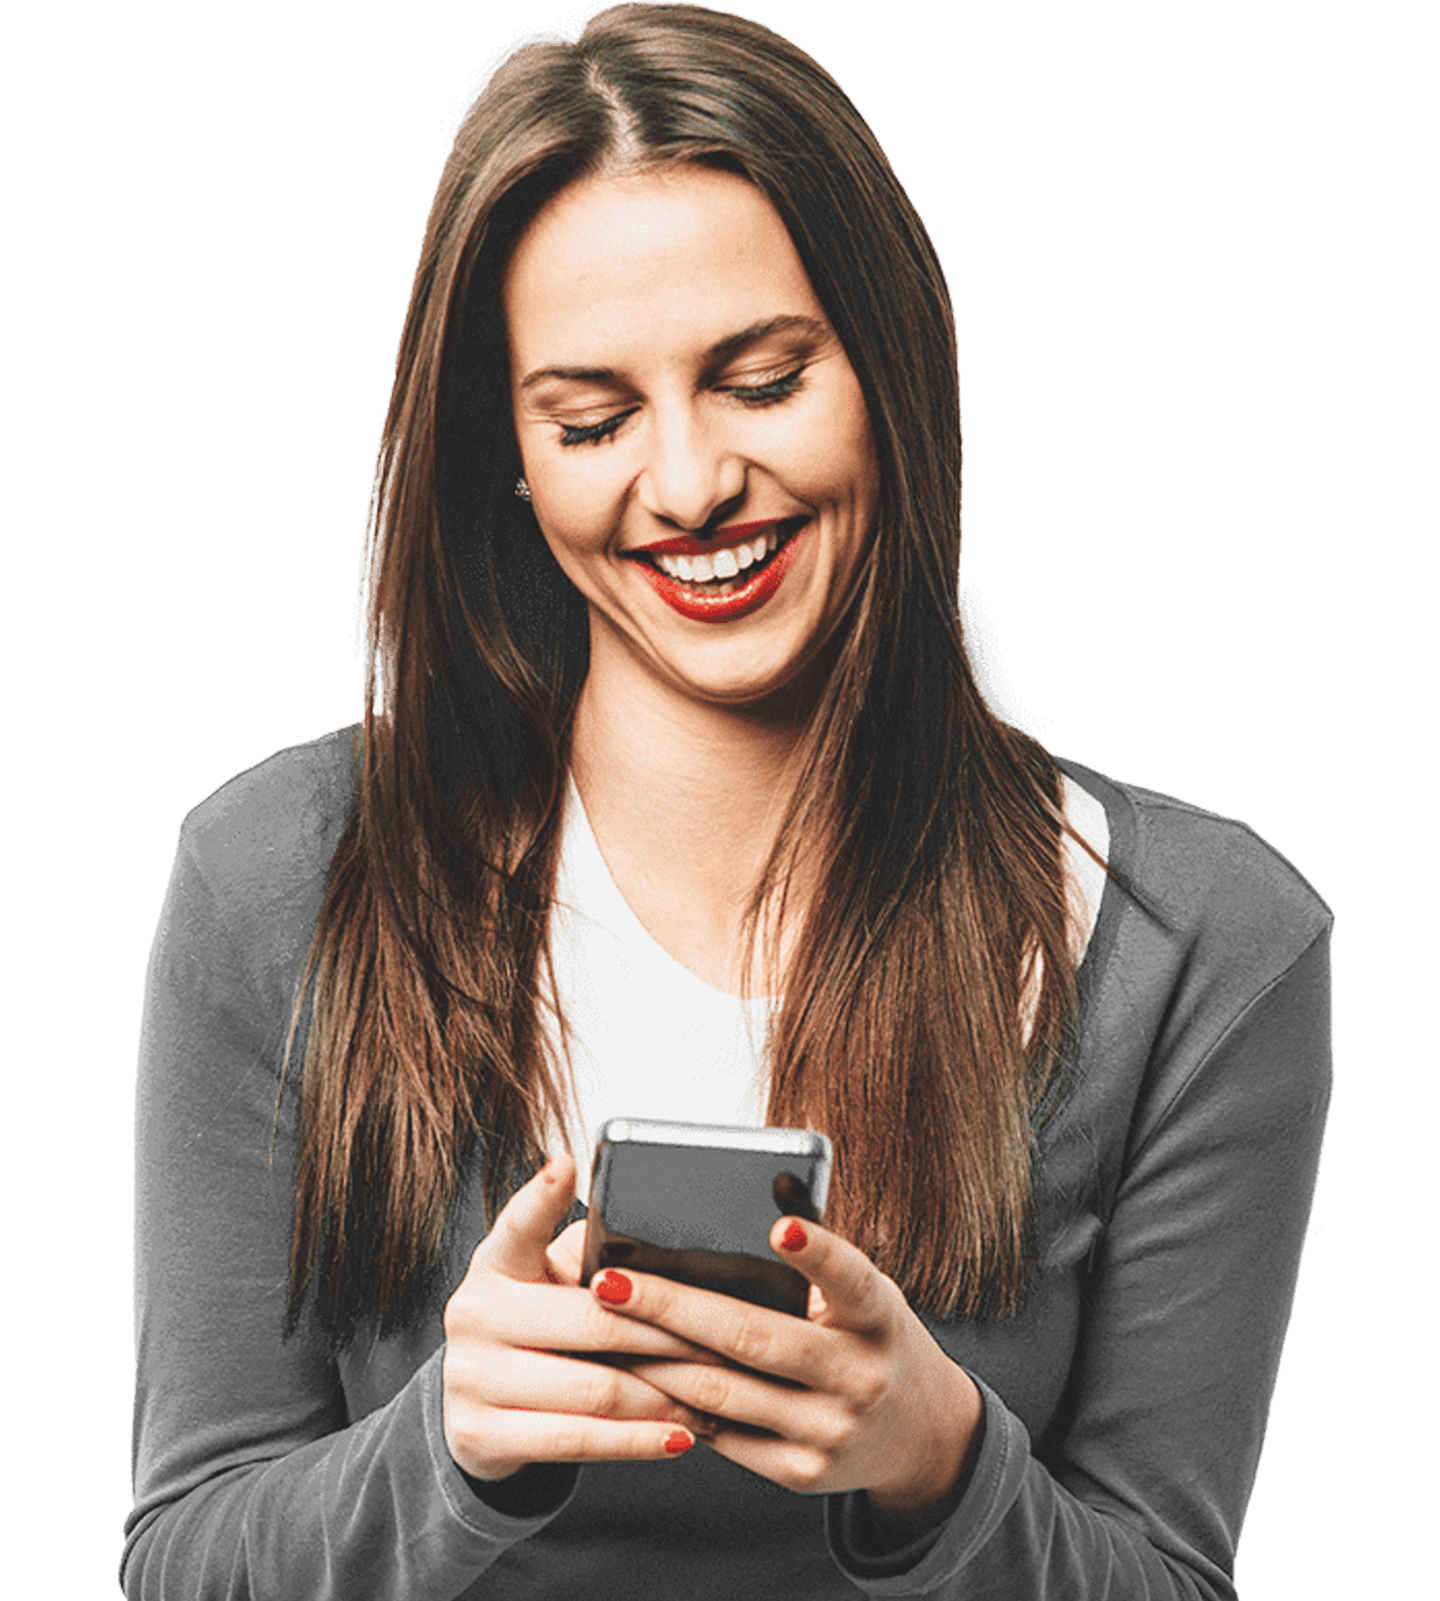 A person smiling and looking down at their phone